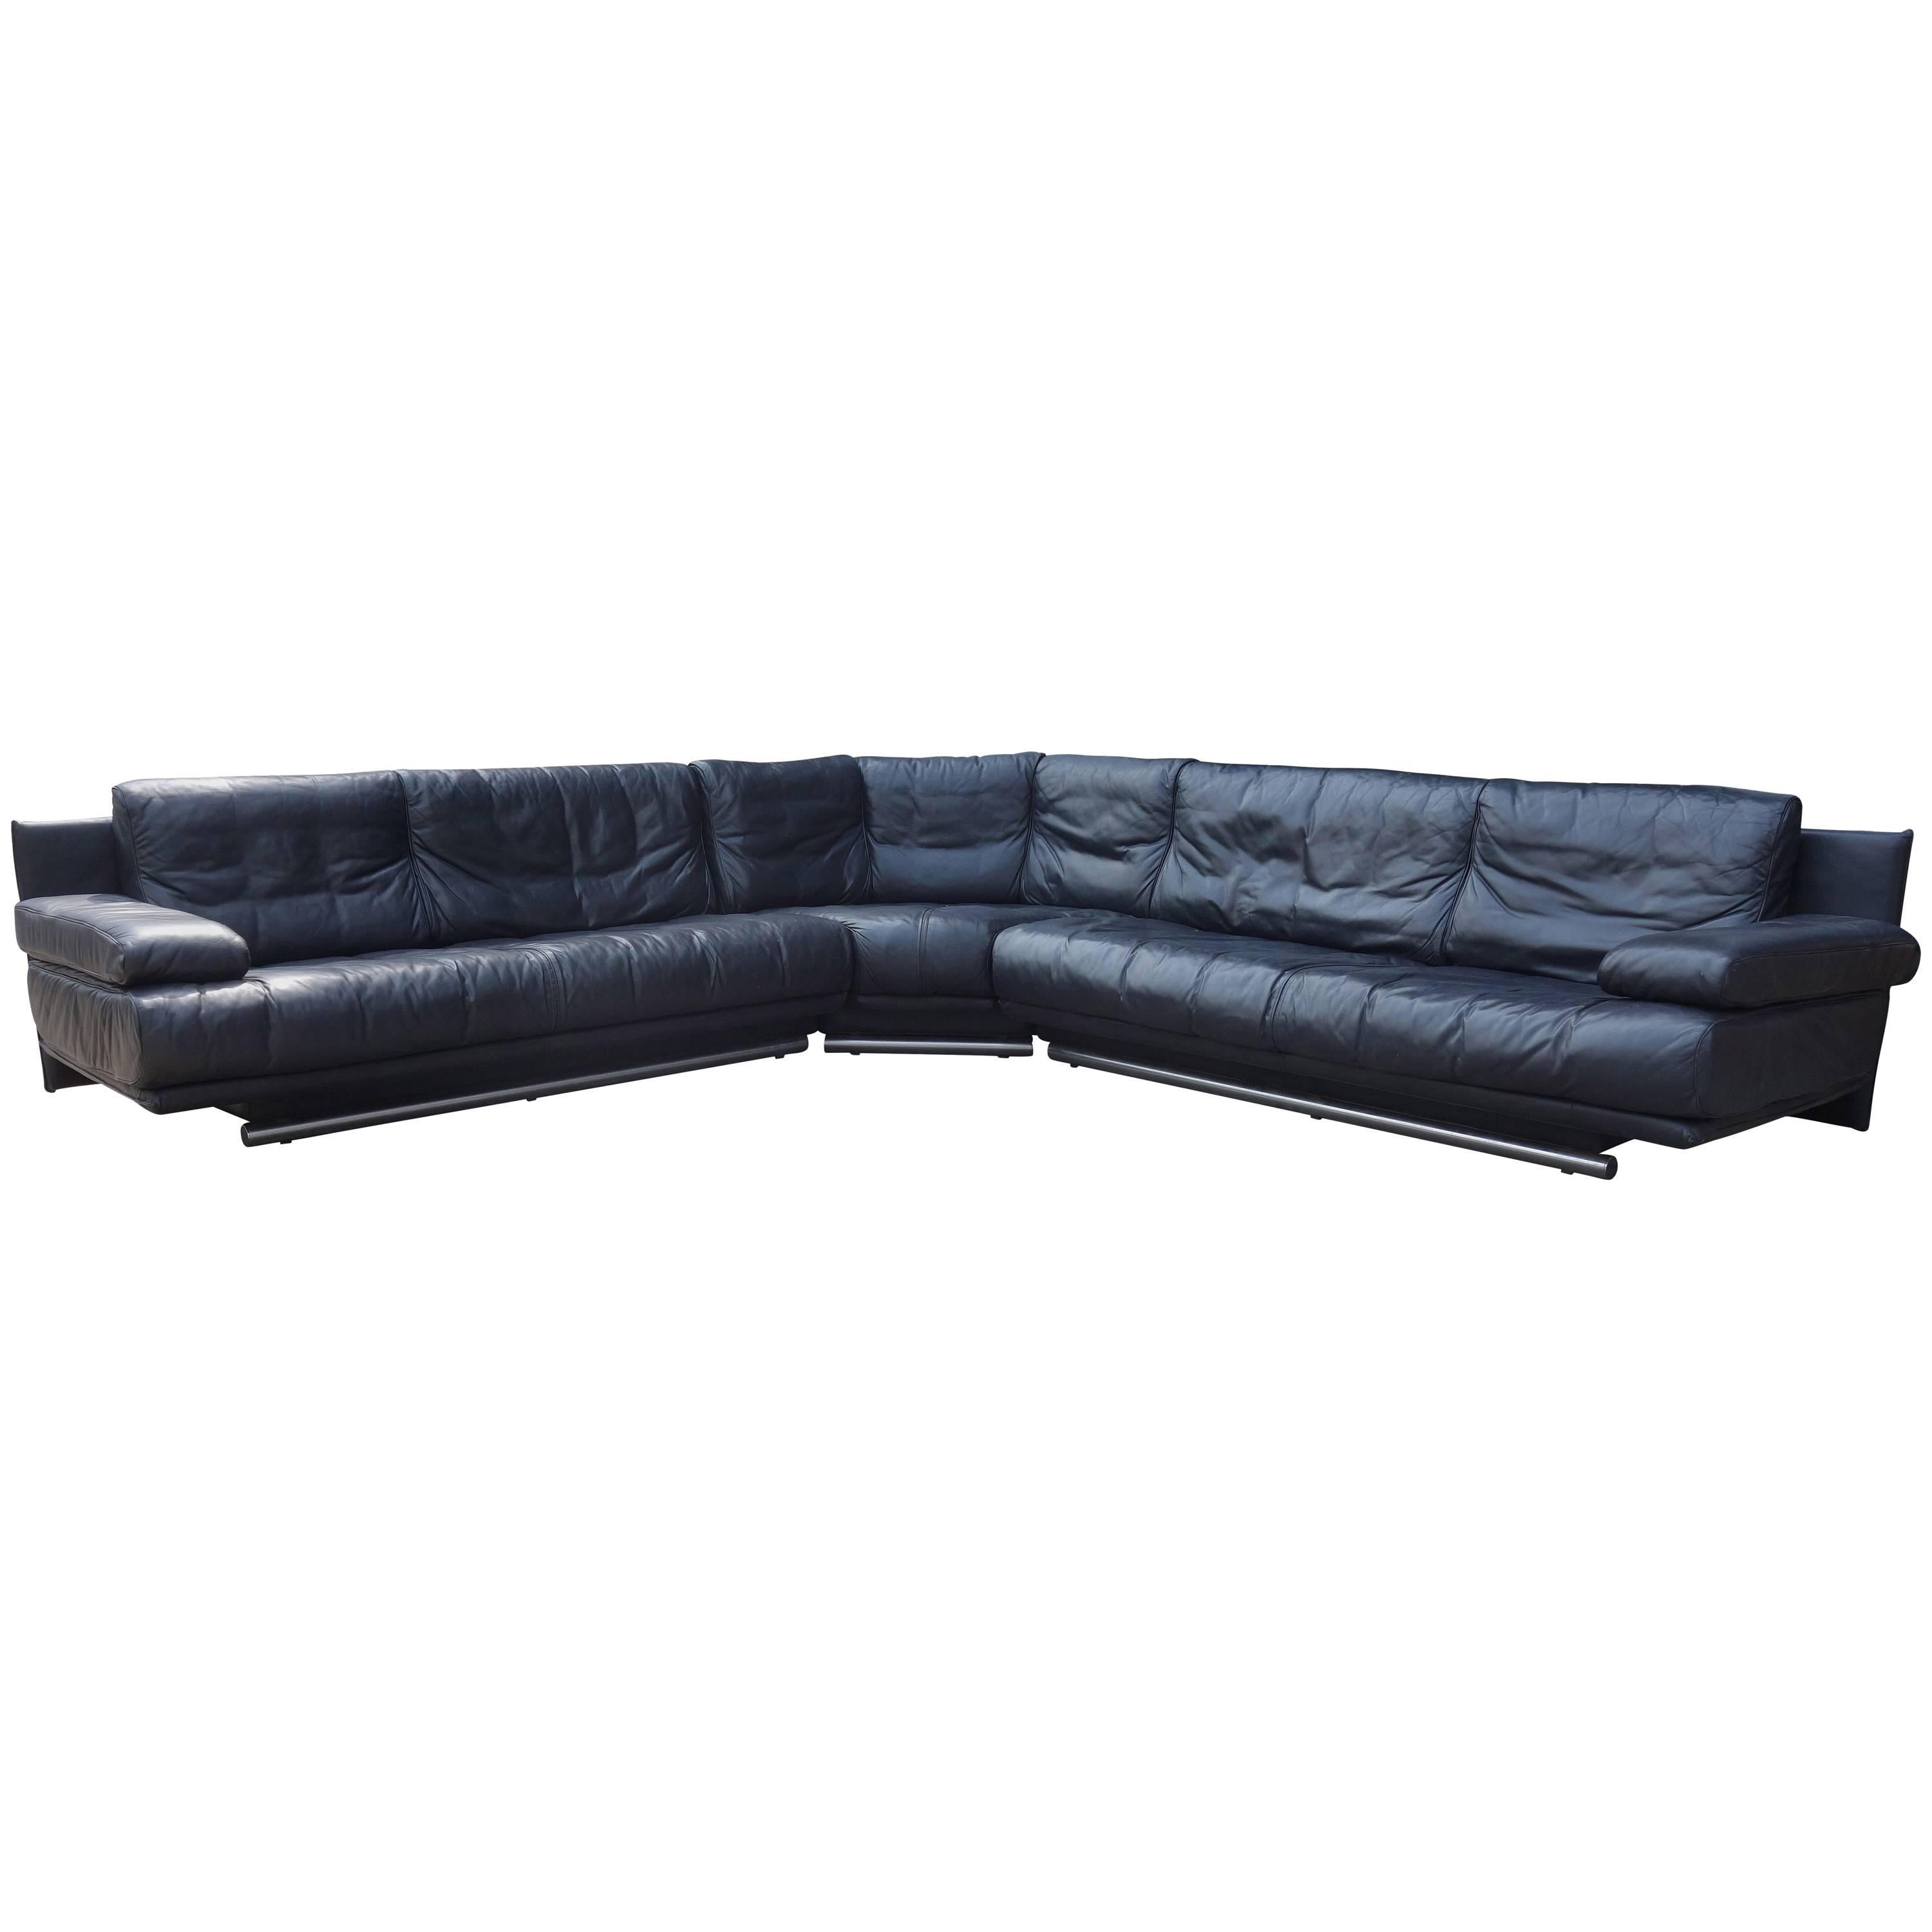 Midcentury Leather Sectional Sofa